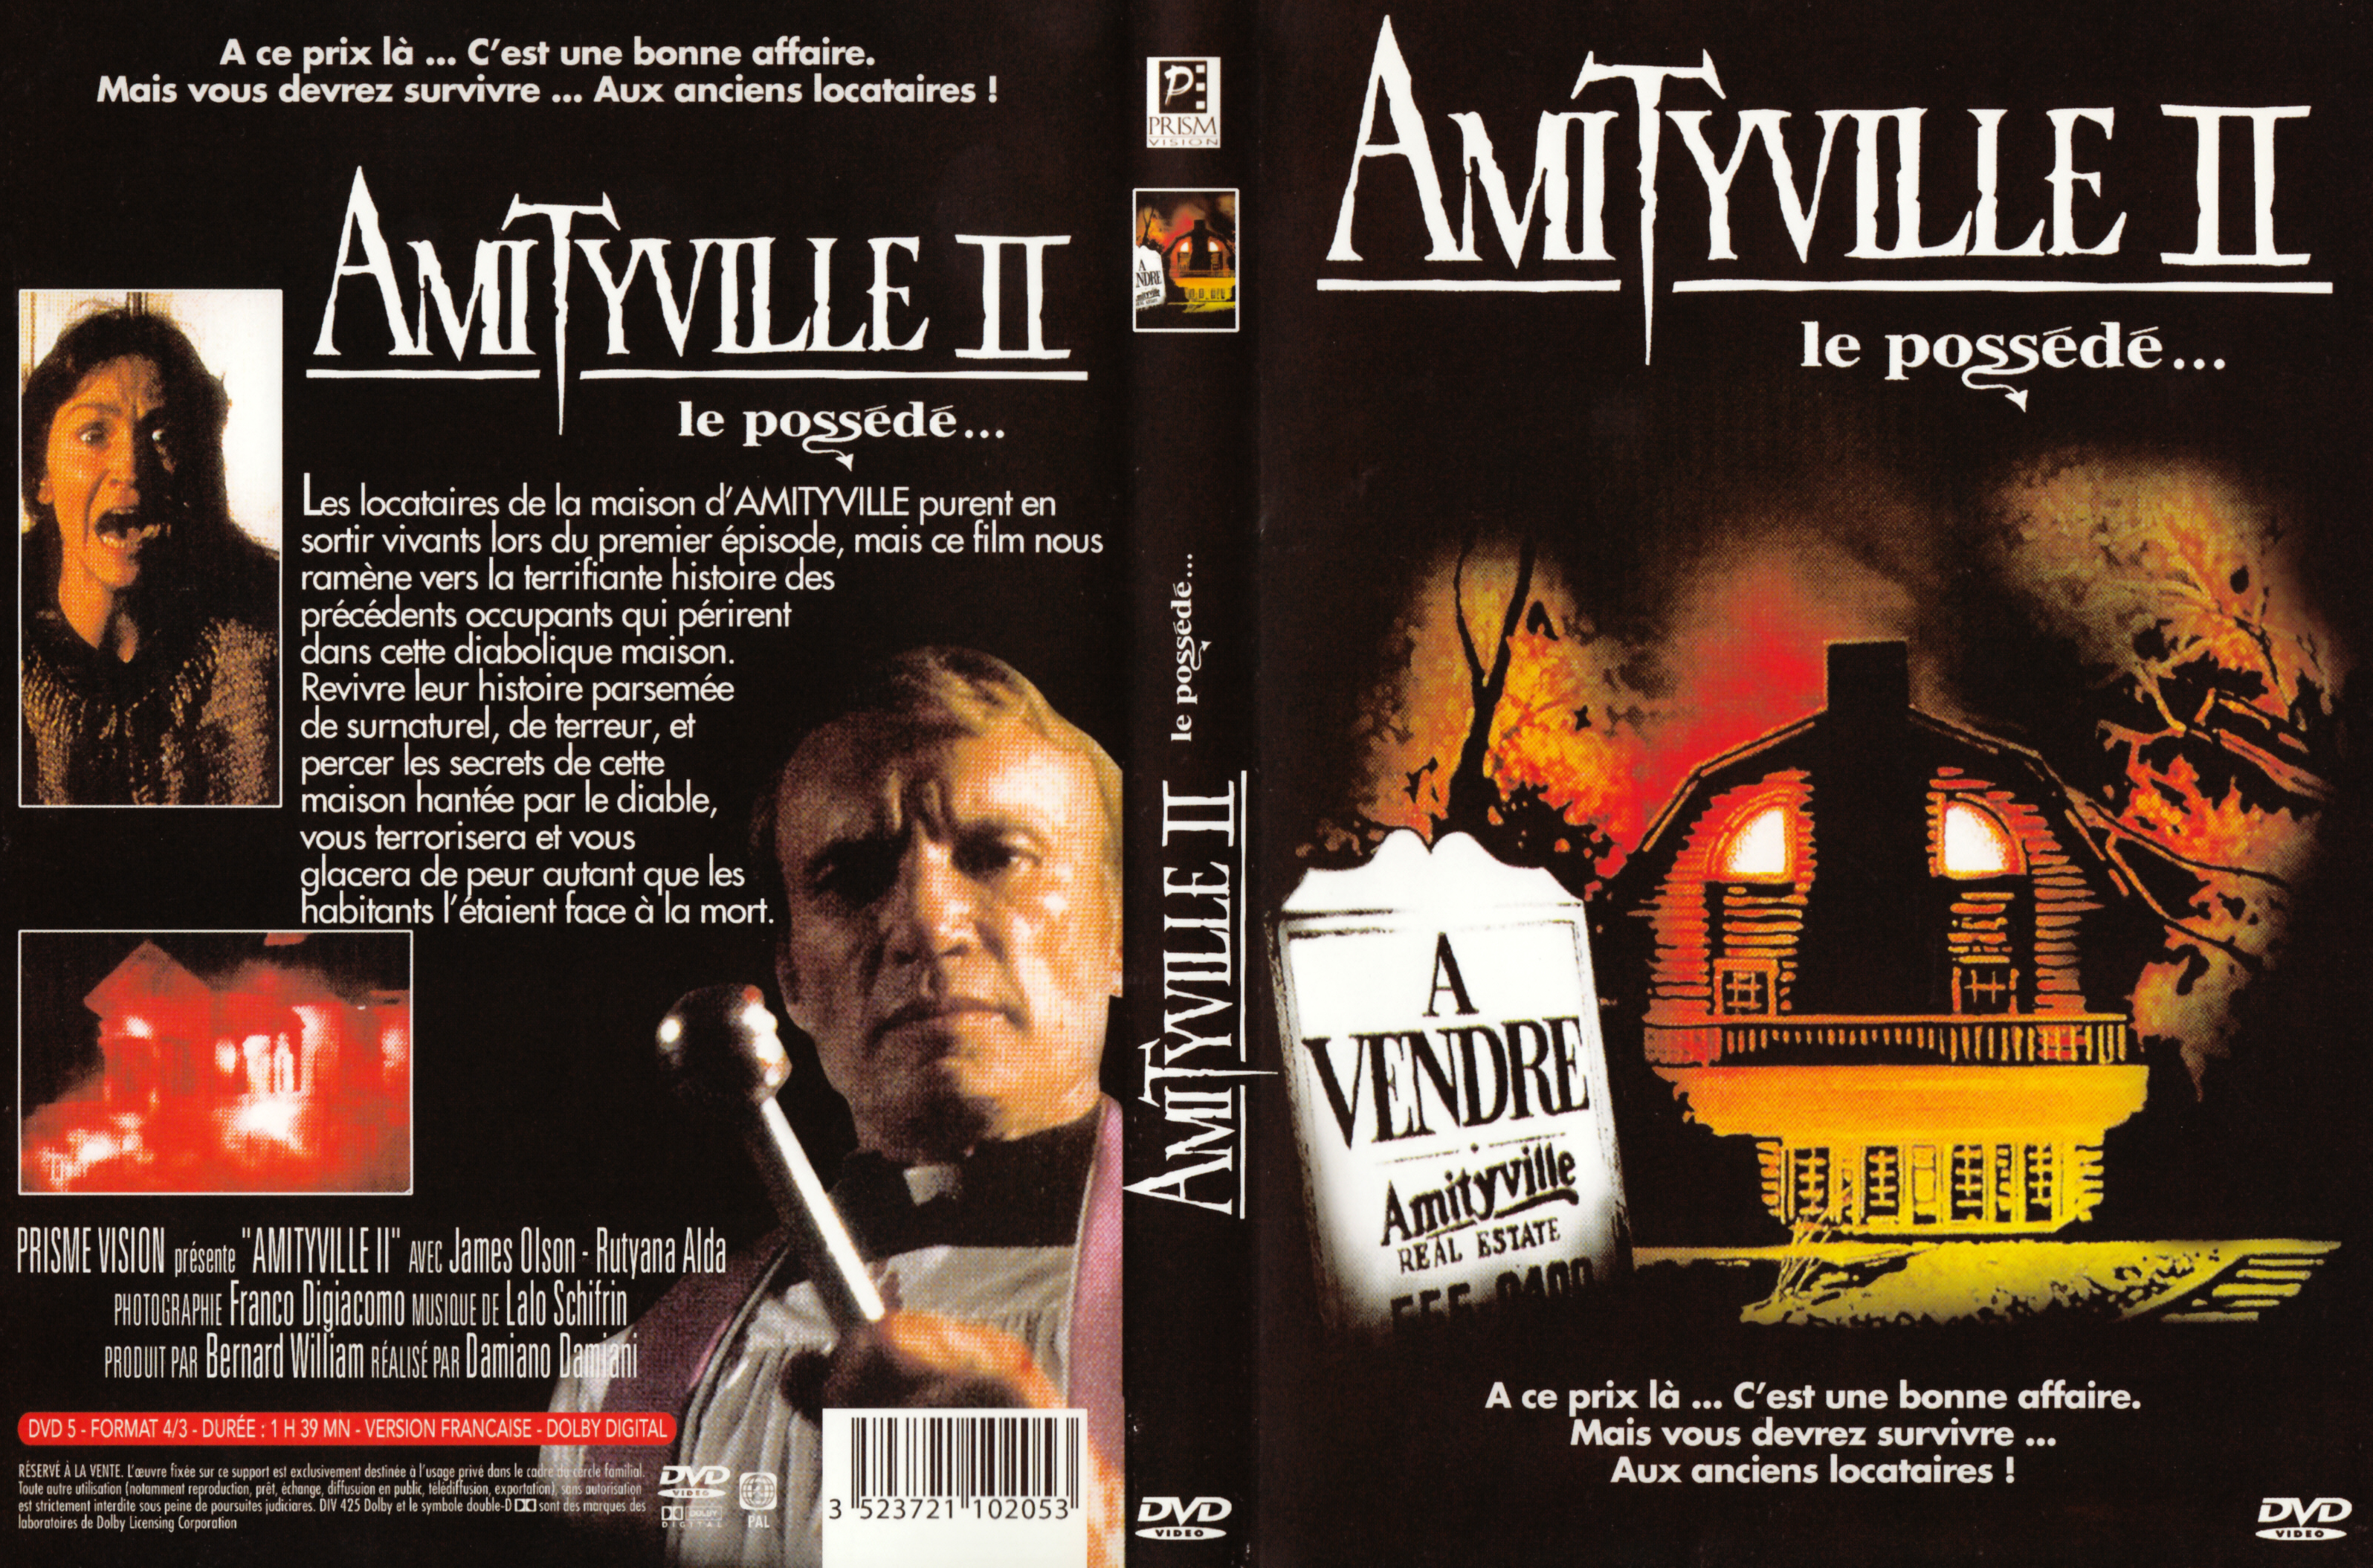 Jaquette DVD Amityville 2 v5